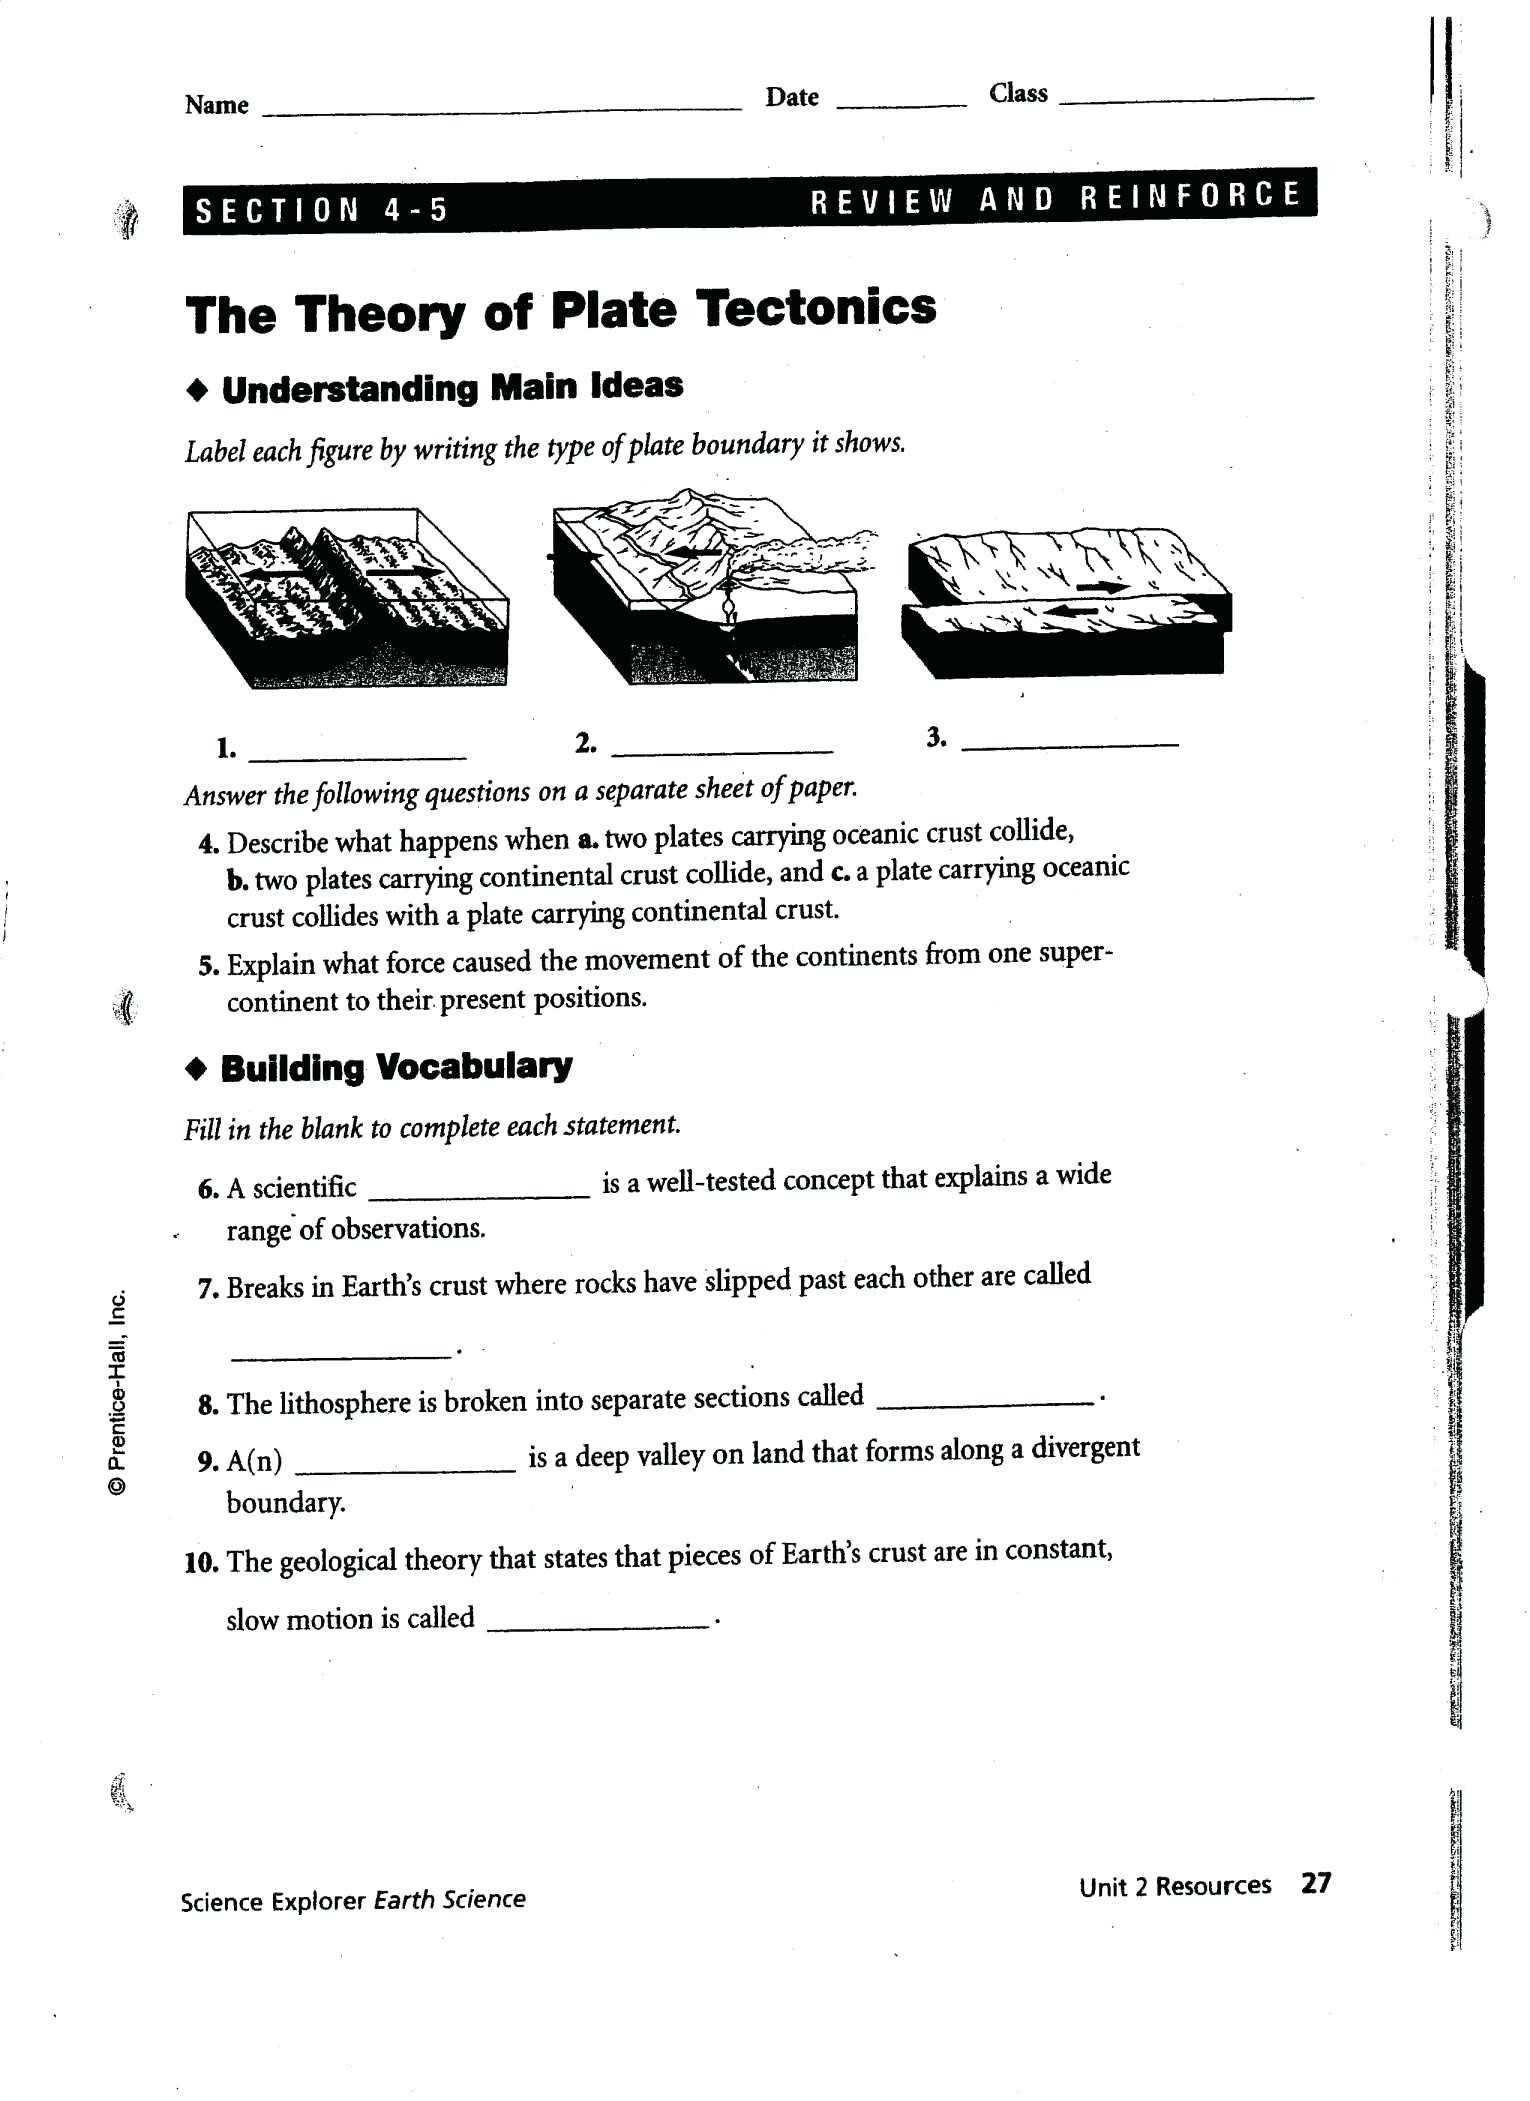 Plate Tectonics Worksheet Answers Plate Tectonics Worksheets for Middle School Awesome the